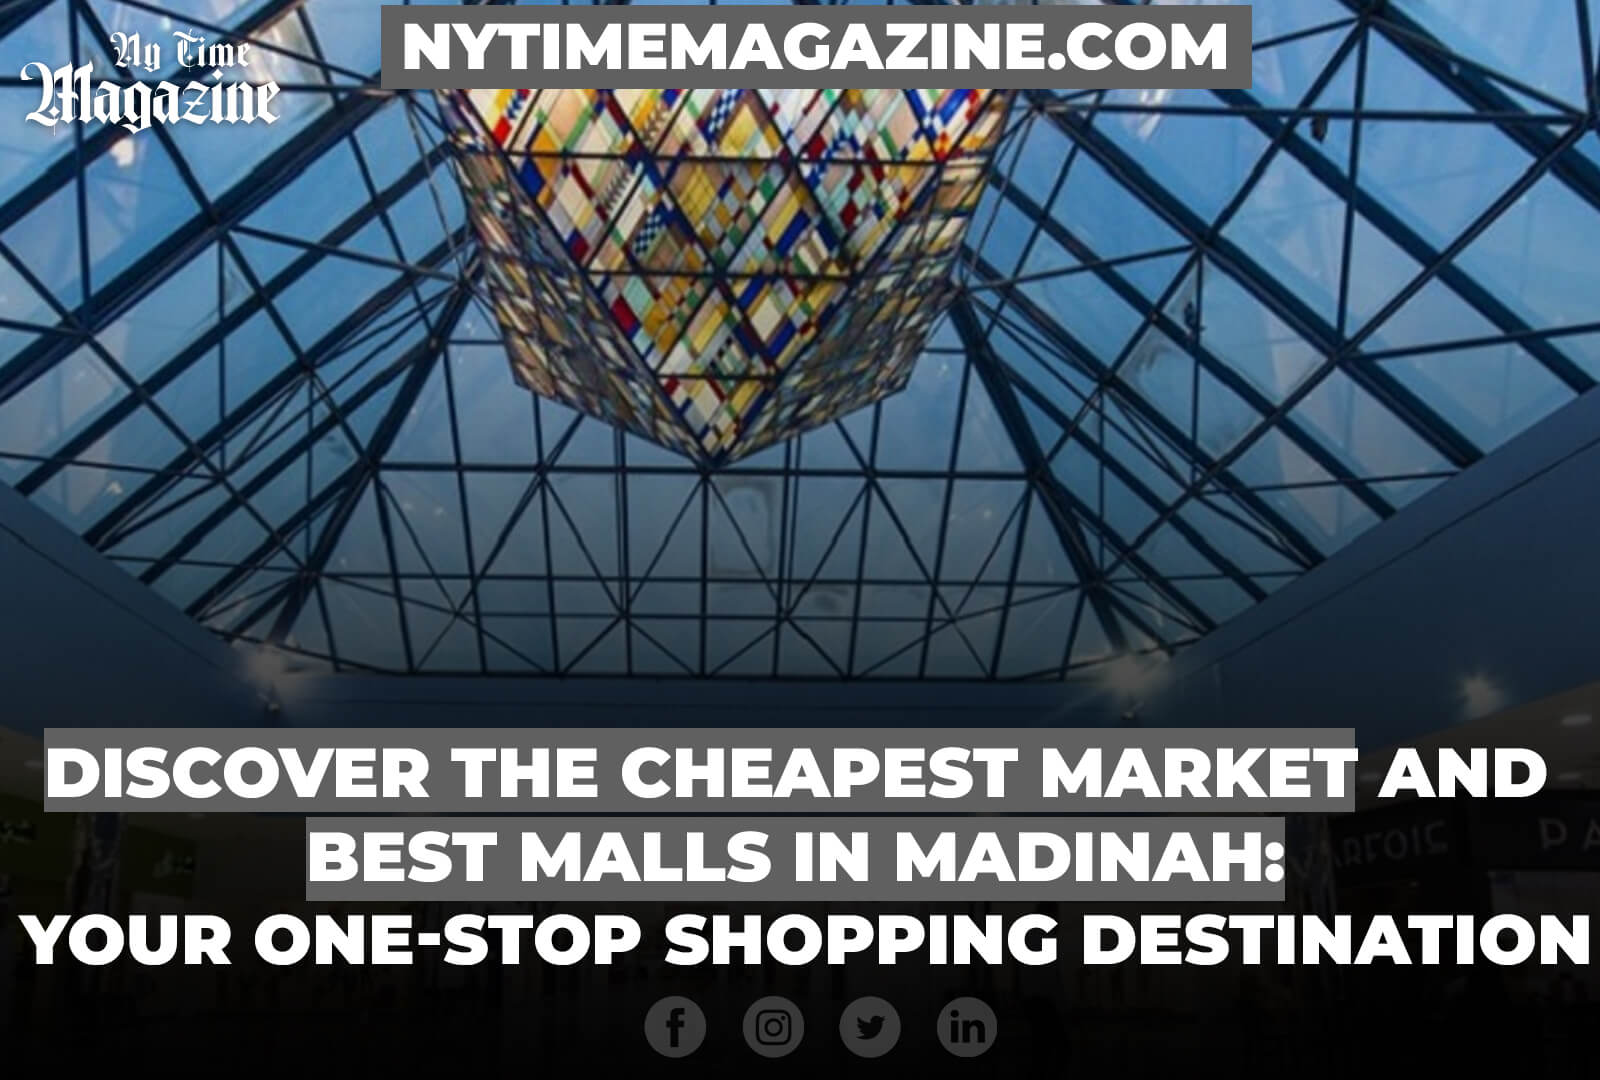 DISCOVER THE CHEAPEST MARKET AND BEST MALLS IN MADINAH: YOUR ONE-STOP SHOPPING DESTINATION